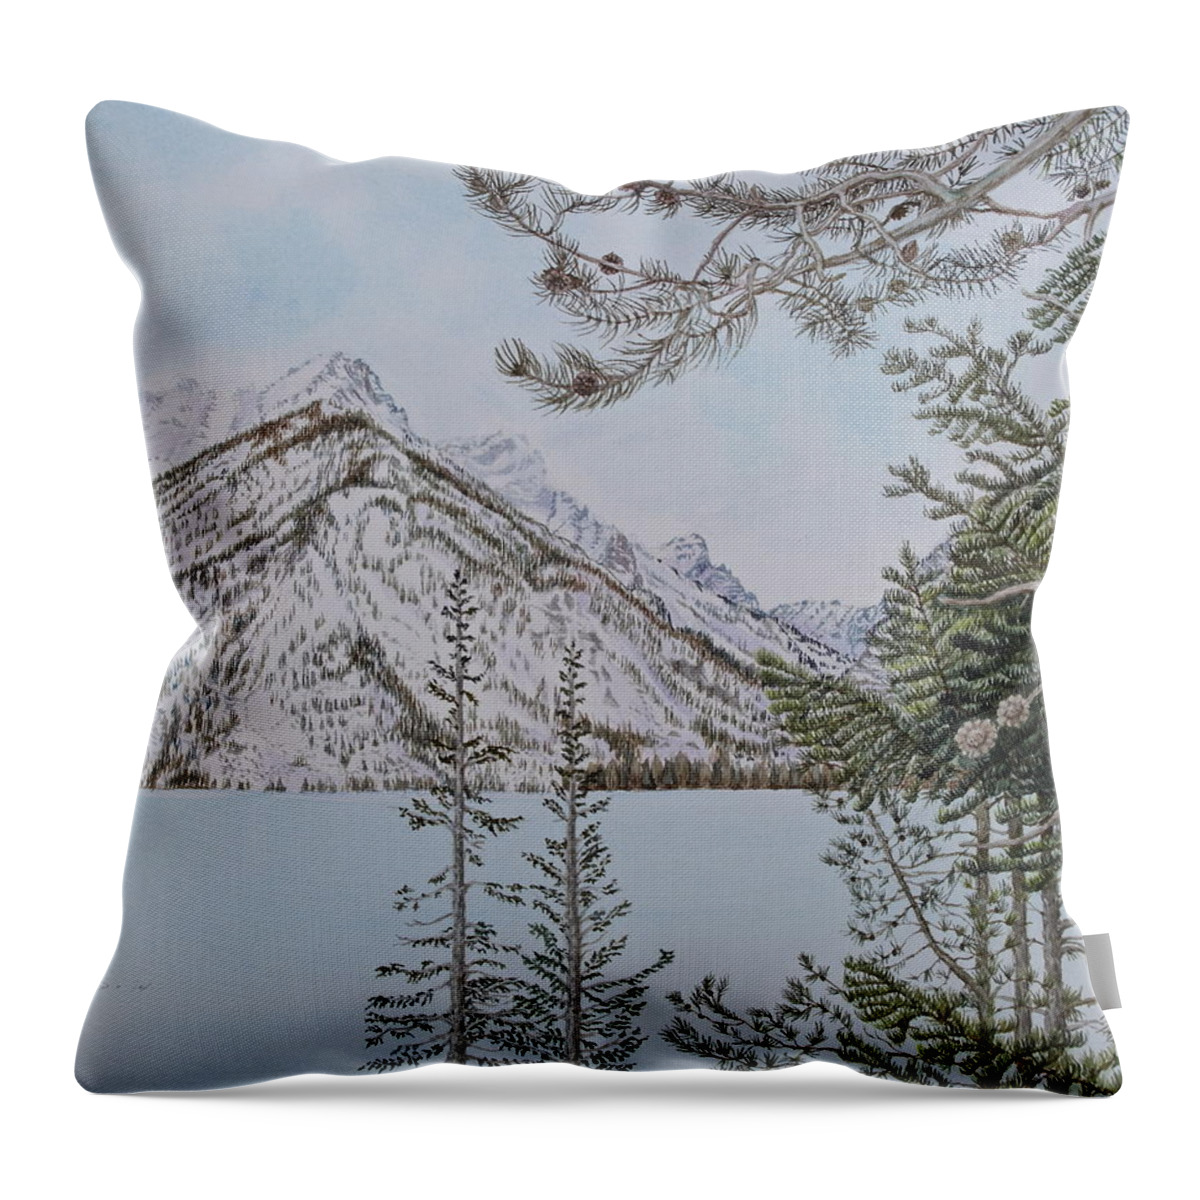 Jenny Lake Throw Pillow featuring the painting Grand Teton View by Michele Myers